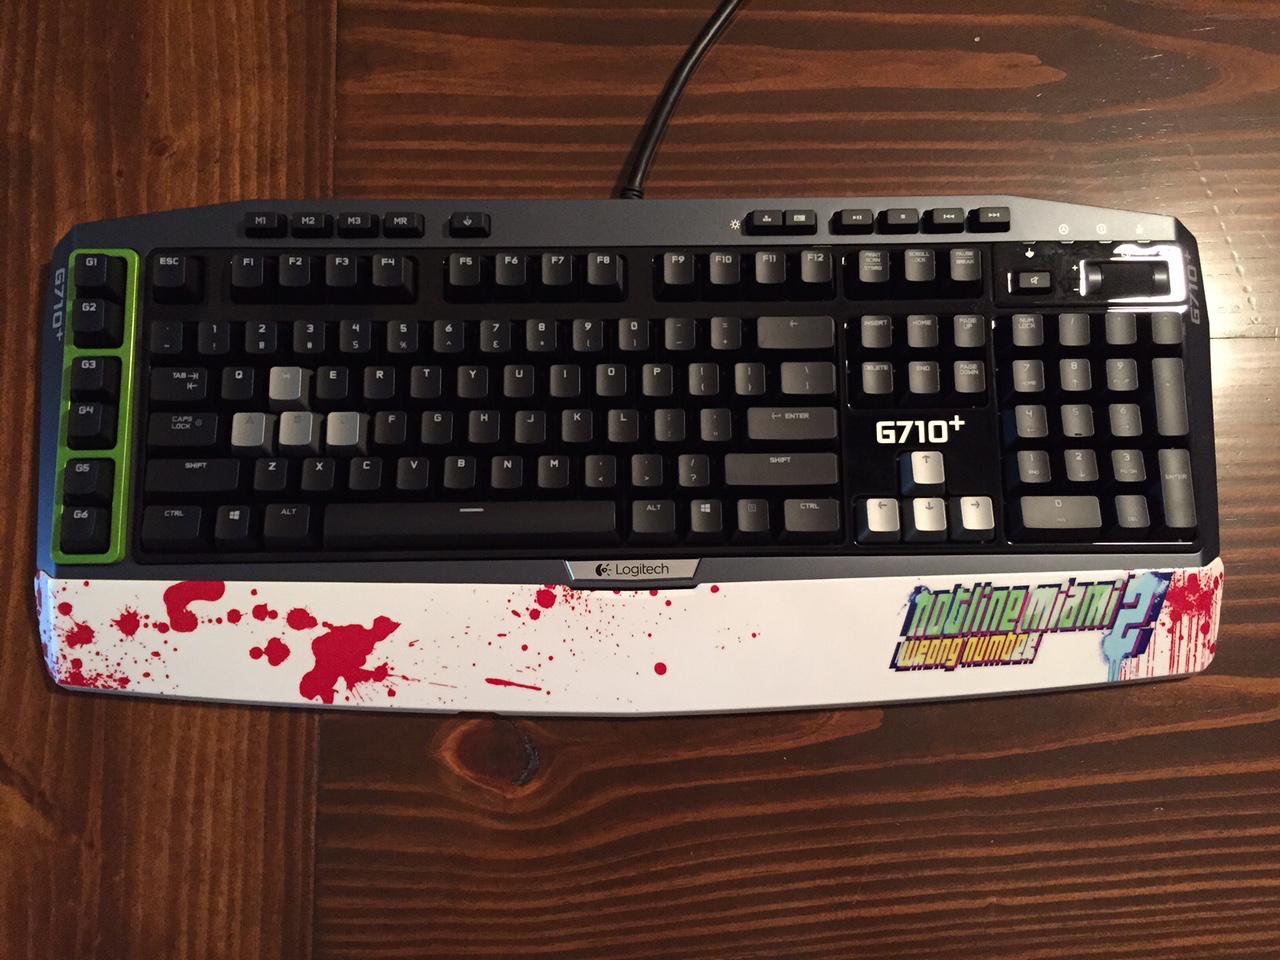 Devolver Digital Twitter: "Our friends @Logitech created this one of a kind @HotlineMiami G710+ keyboard - follow and retweet to enter to win! http://t.co/jemXb1a6LT" / Twitter